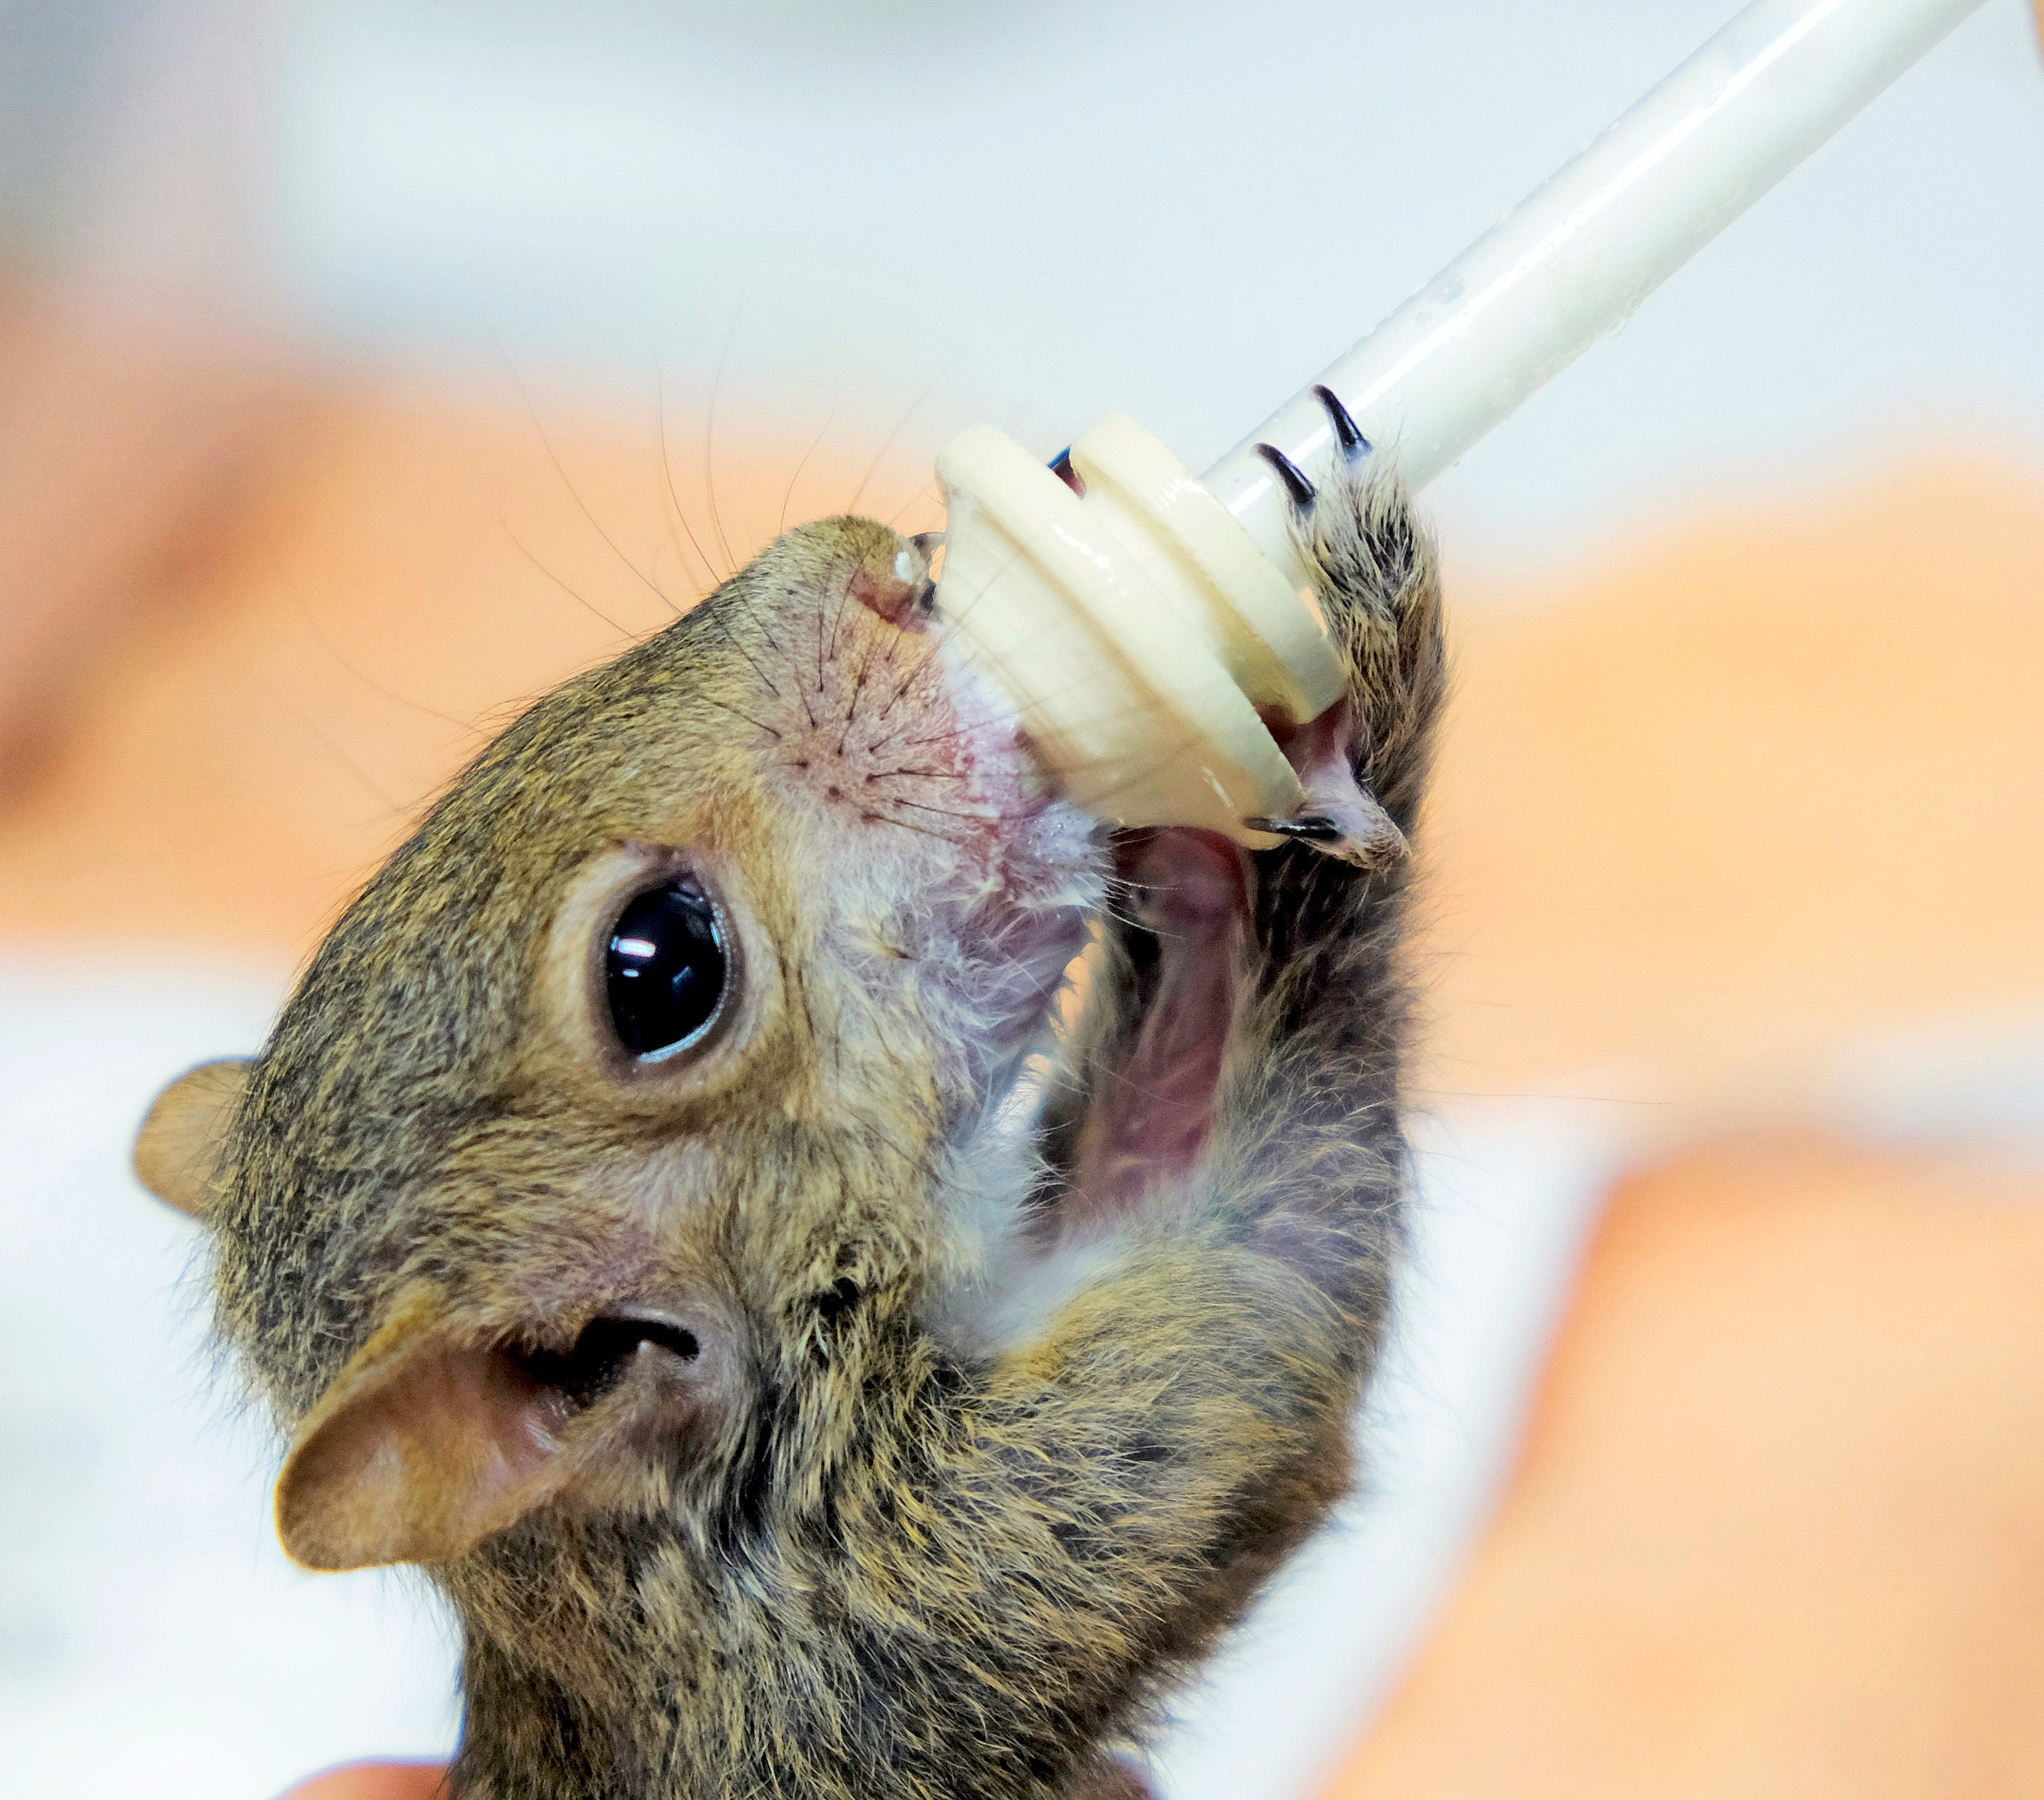 How To Care For A Infant Squirrel / Baby Squirrel Feeding Frenzy ...